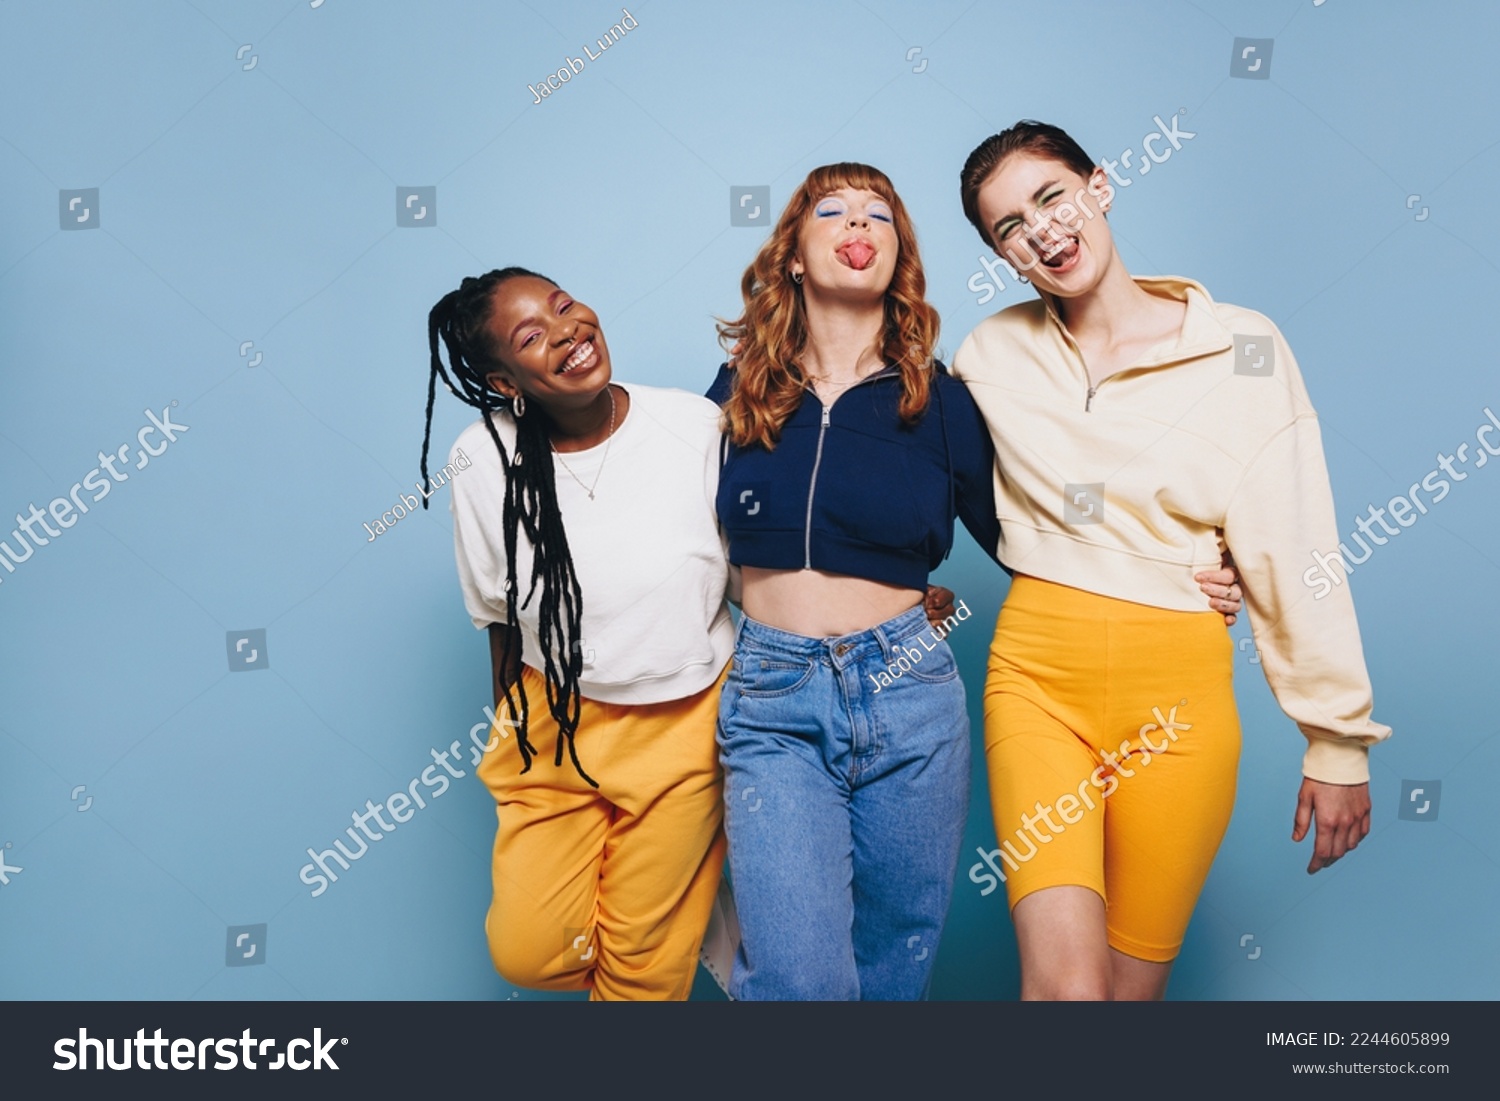 Cheerful female friends making funny faces and looking at the camera while embracing each other. Group of happy young women having fun while standing against a blue studio background. #2244605899